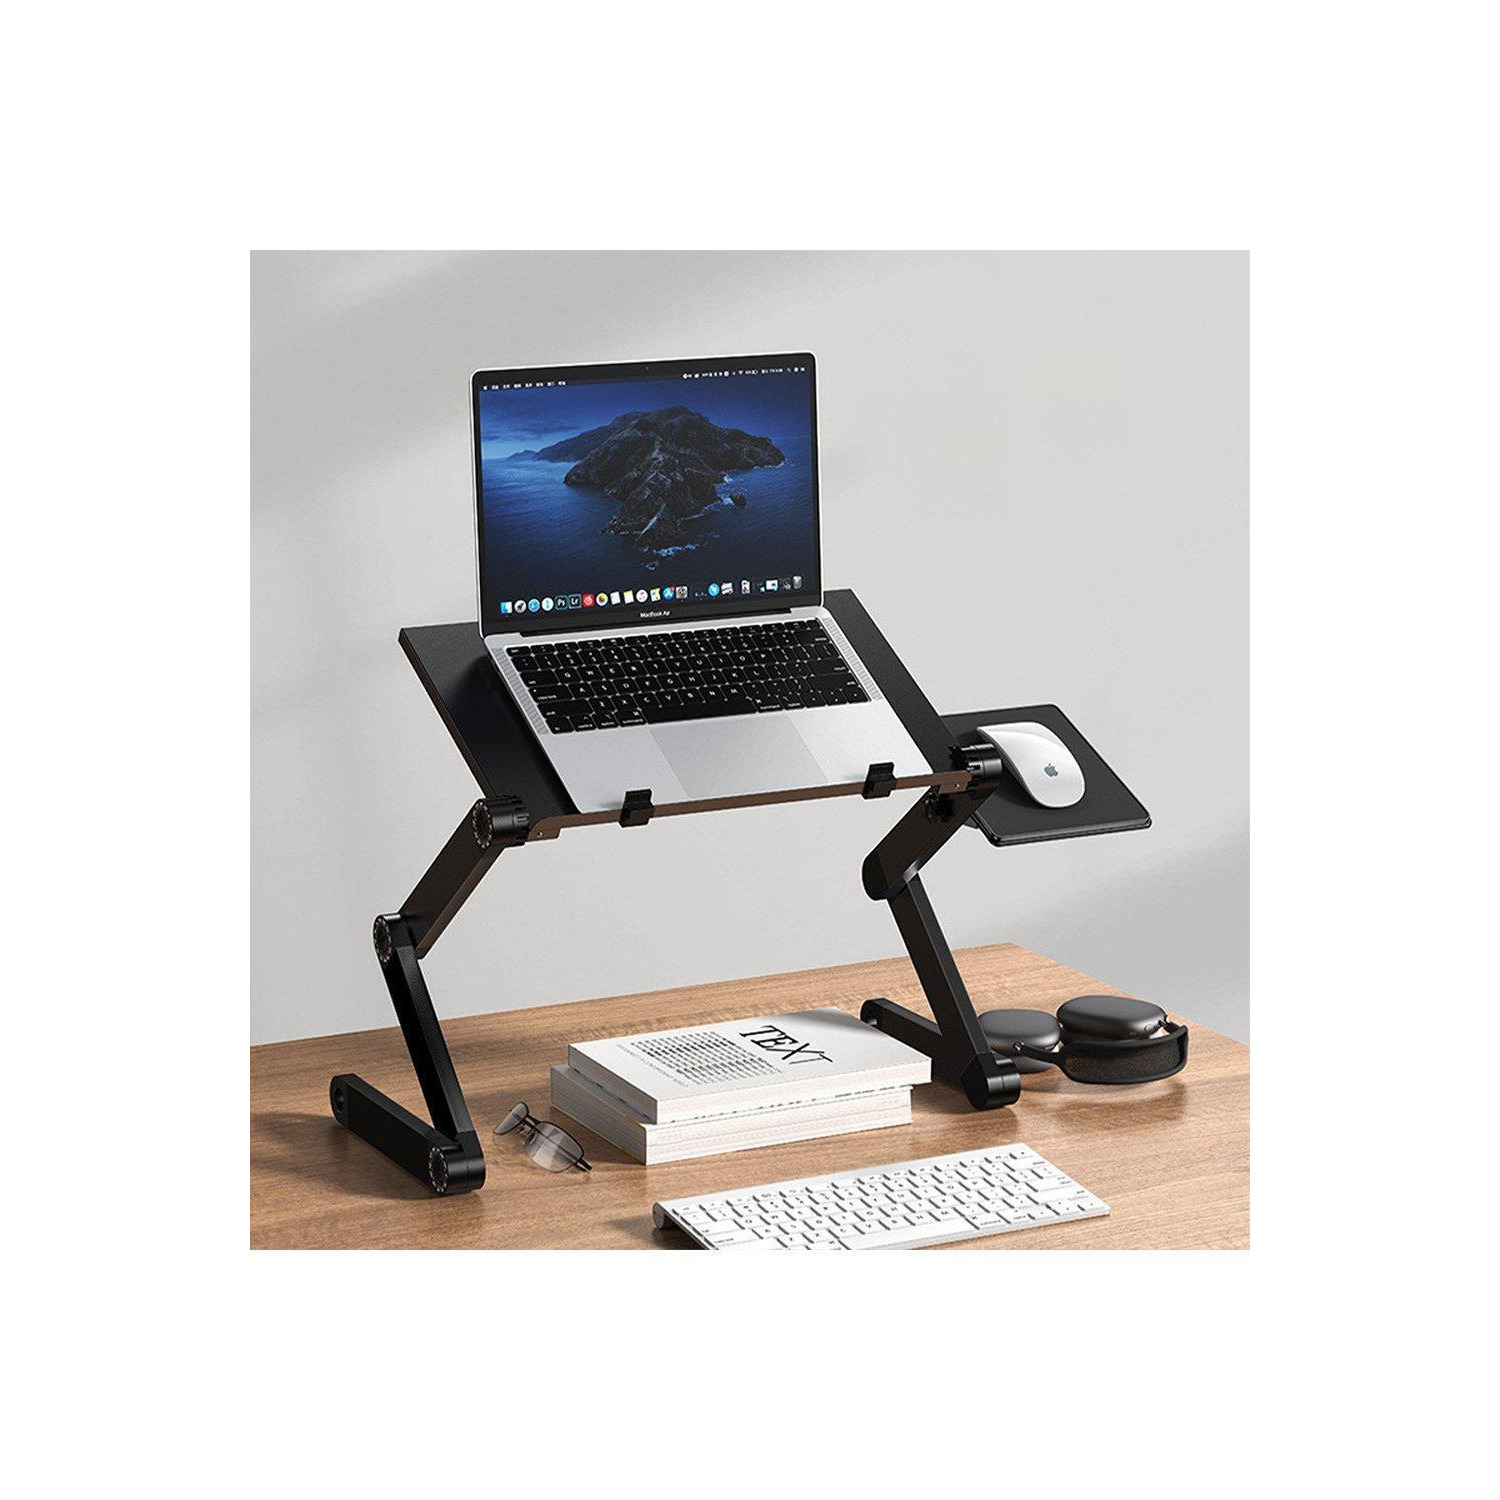 Adjustable Foldable Laptop Stand with Cooling Fans - image 1